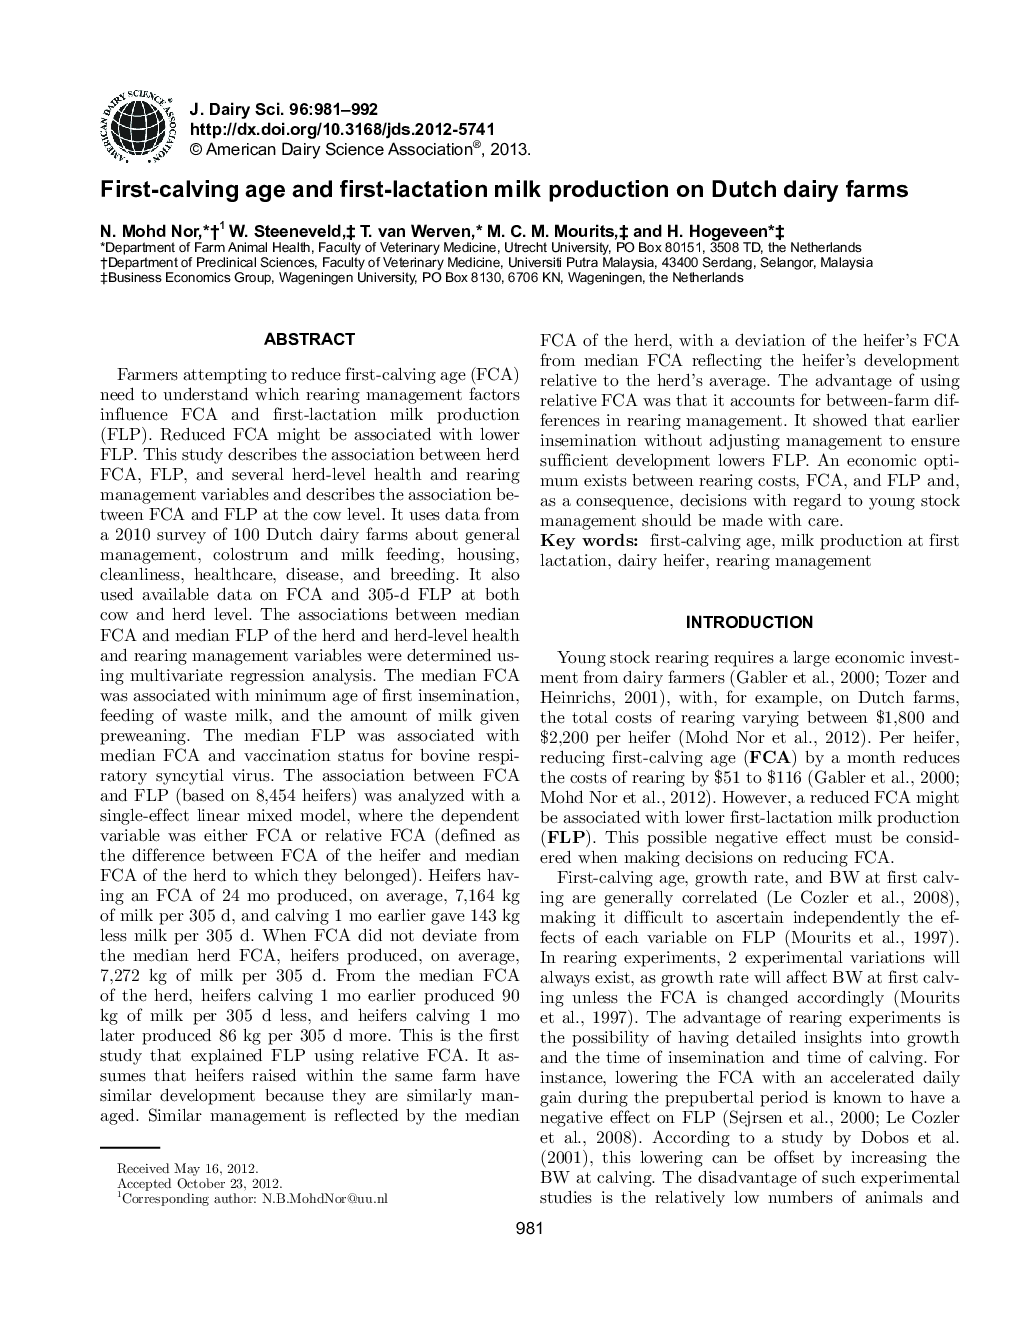 First-calving age and first-lactation milk production on Dutch dairy farms